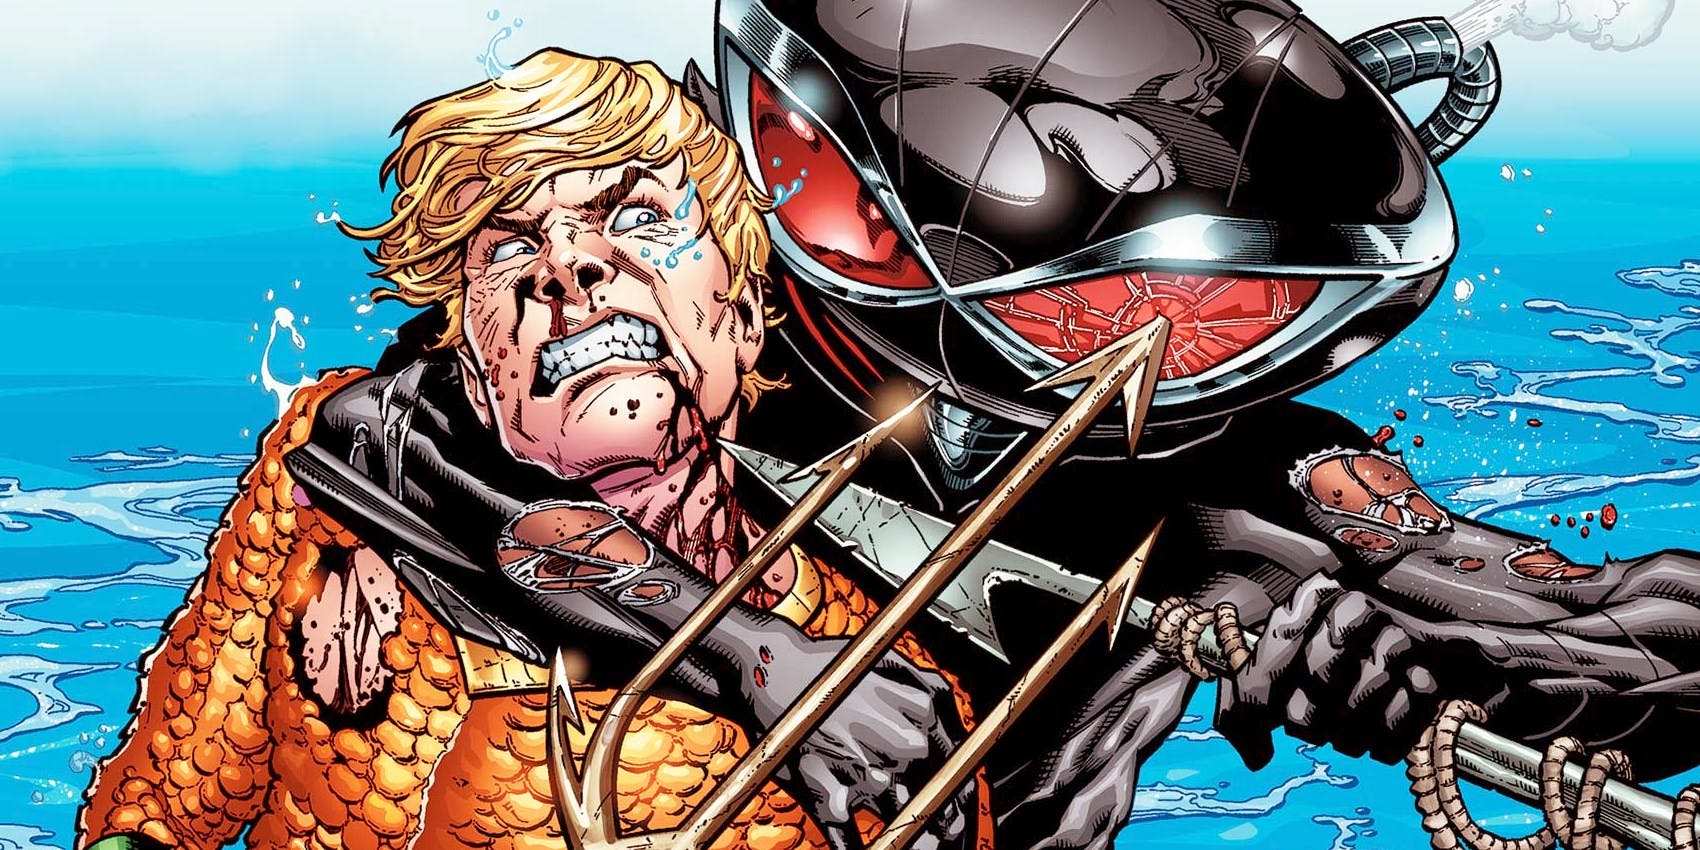 Johns also expressed excitement for a Black Manta film highlighting the sig...